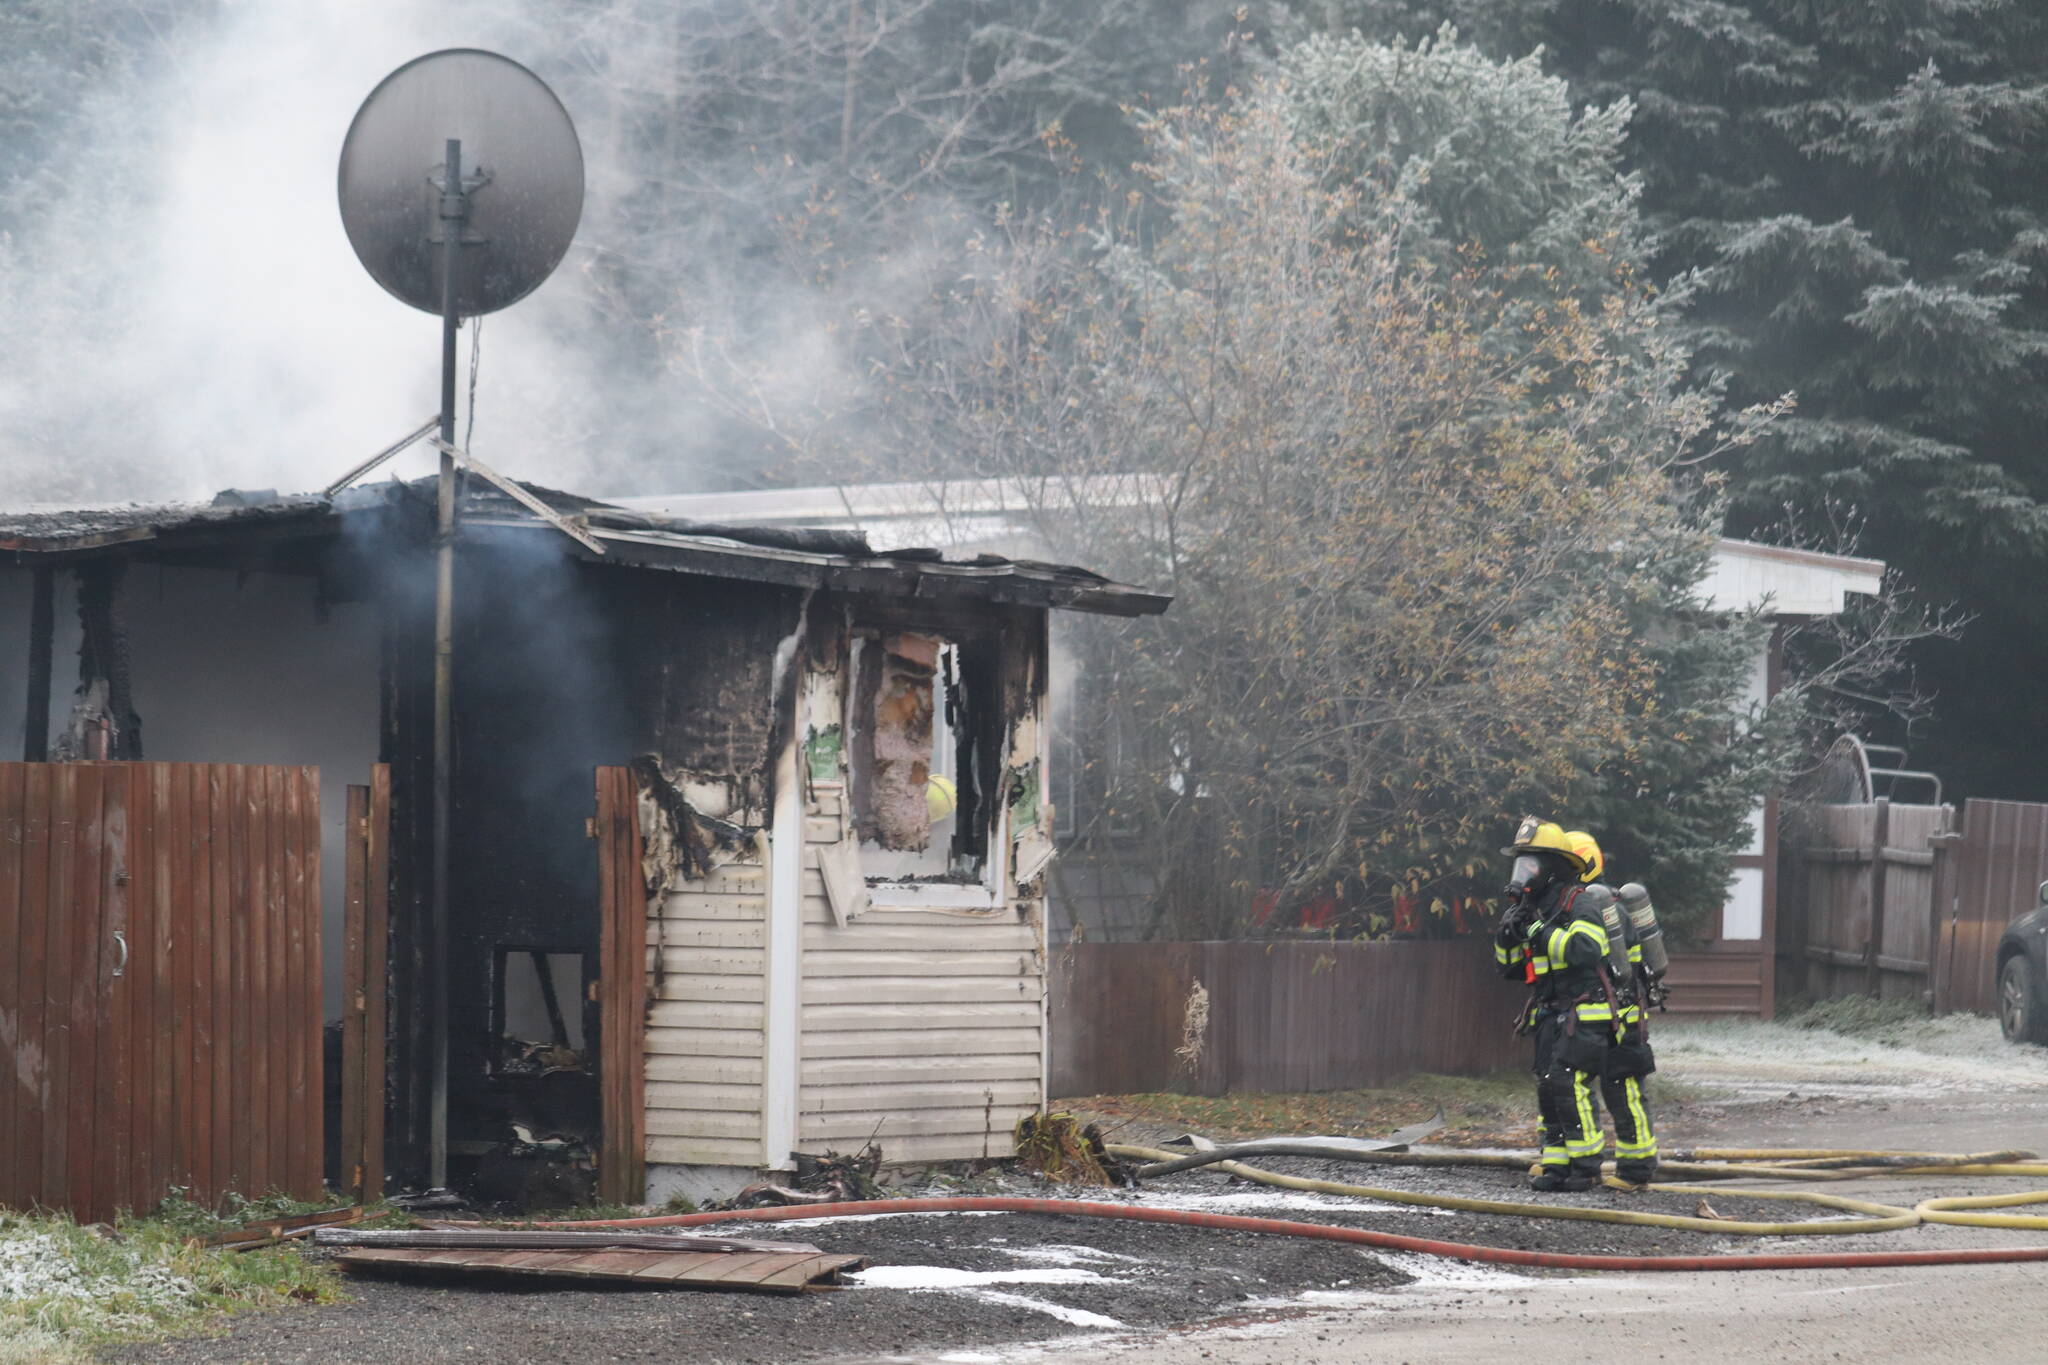 Firefighters working to contain flames Wednesday morning within a trailer in the 9900 block of Stephen Richards Memorial Drive and CCFR determined that the trailer is a total loss based on damages. (Jonson Kuhn / Juneau Empire)